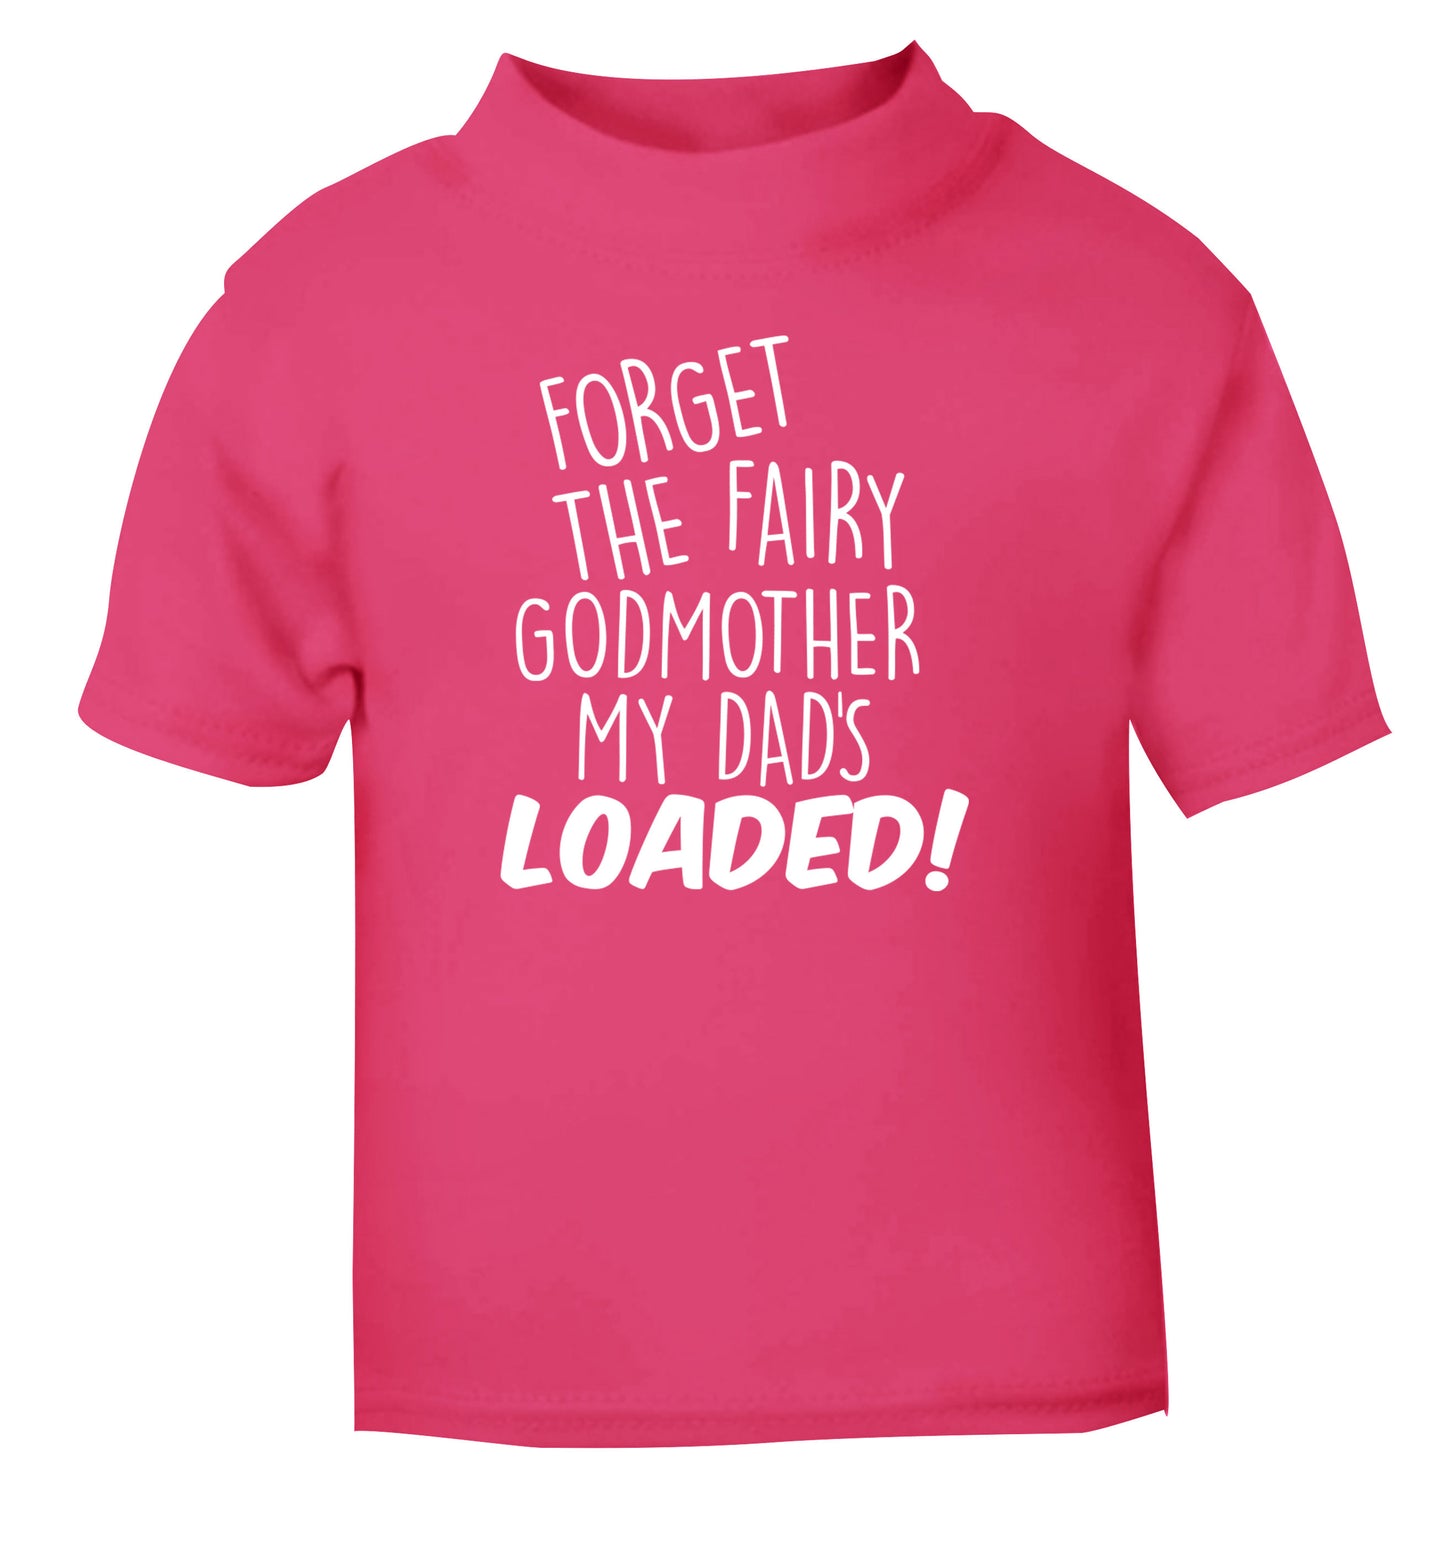 Forget the fairy godmother my dad's loaded pink Baby Toddler Tshirt 2 Years